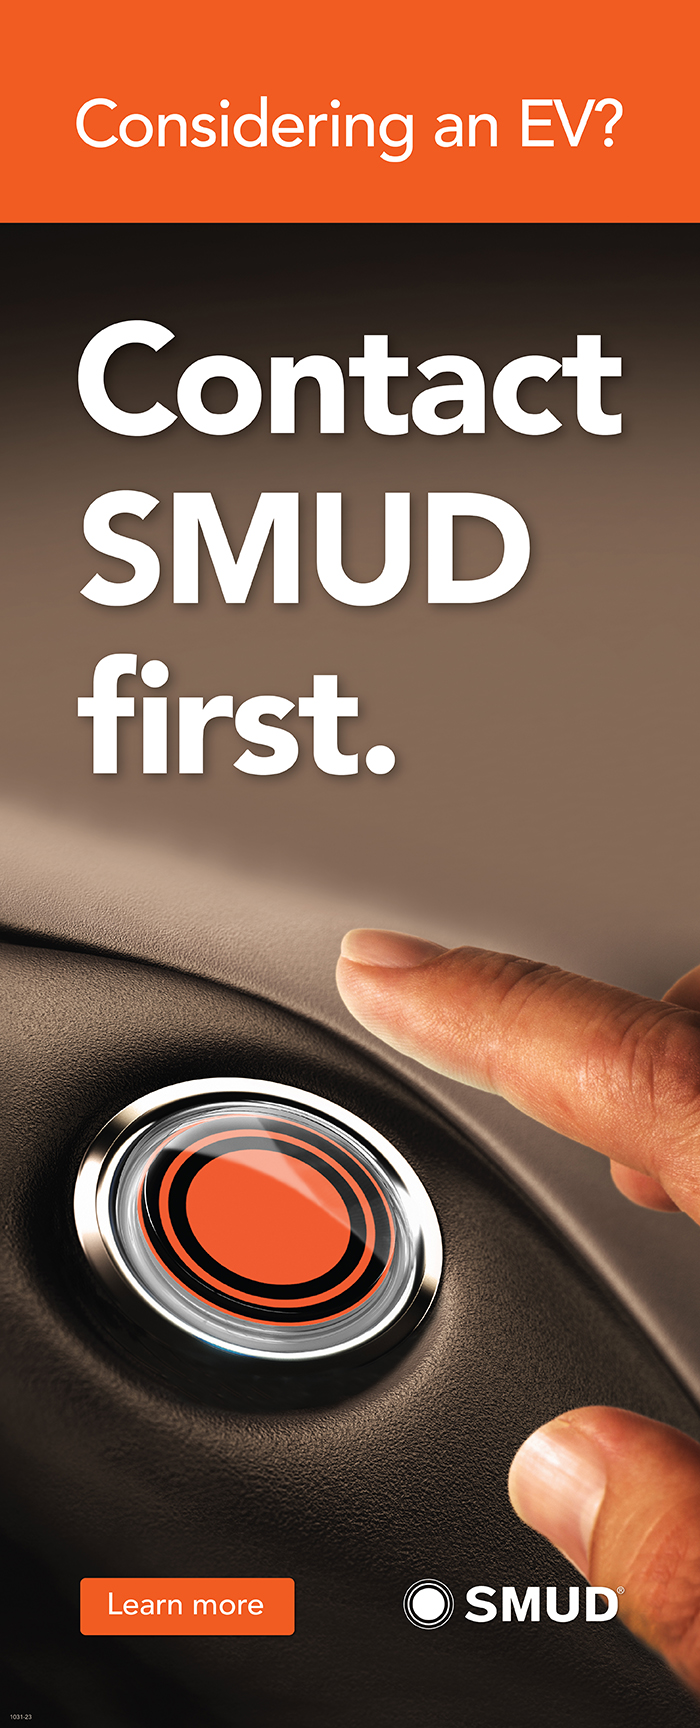 Considering an EV? Contact SMUD first